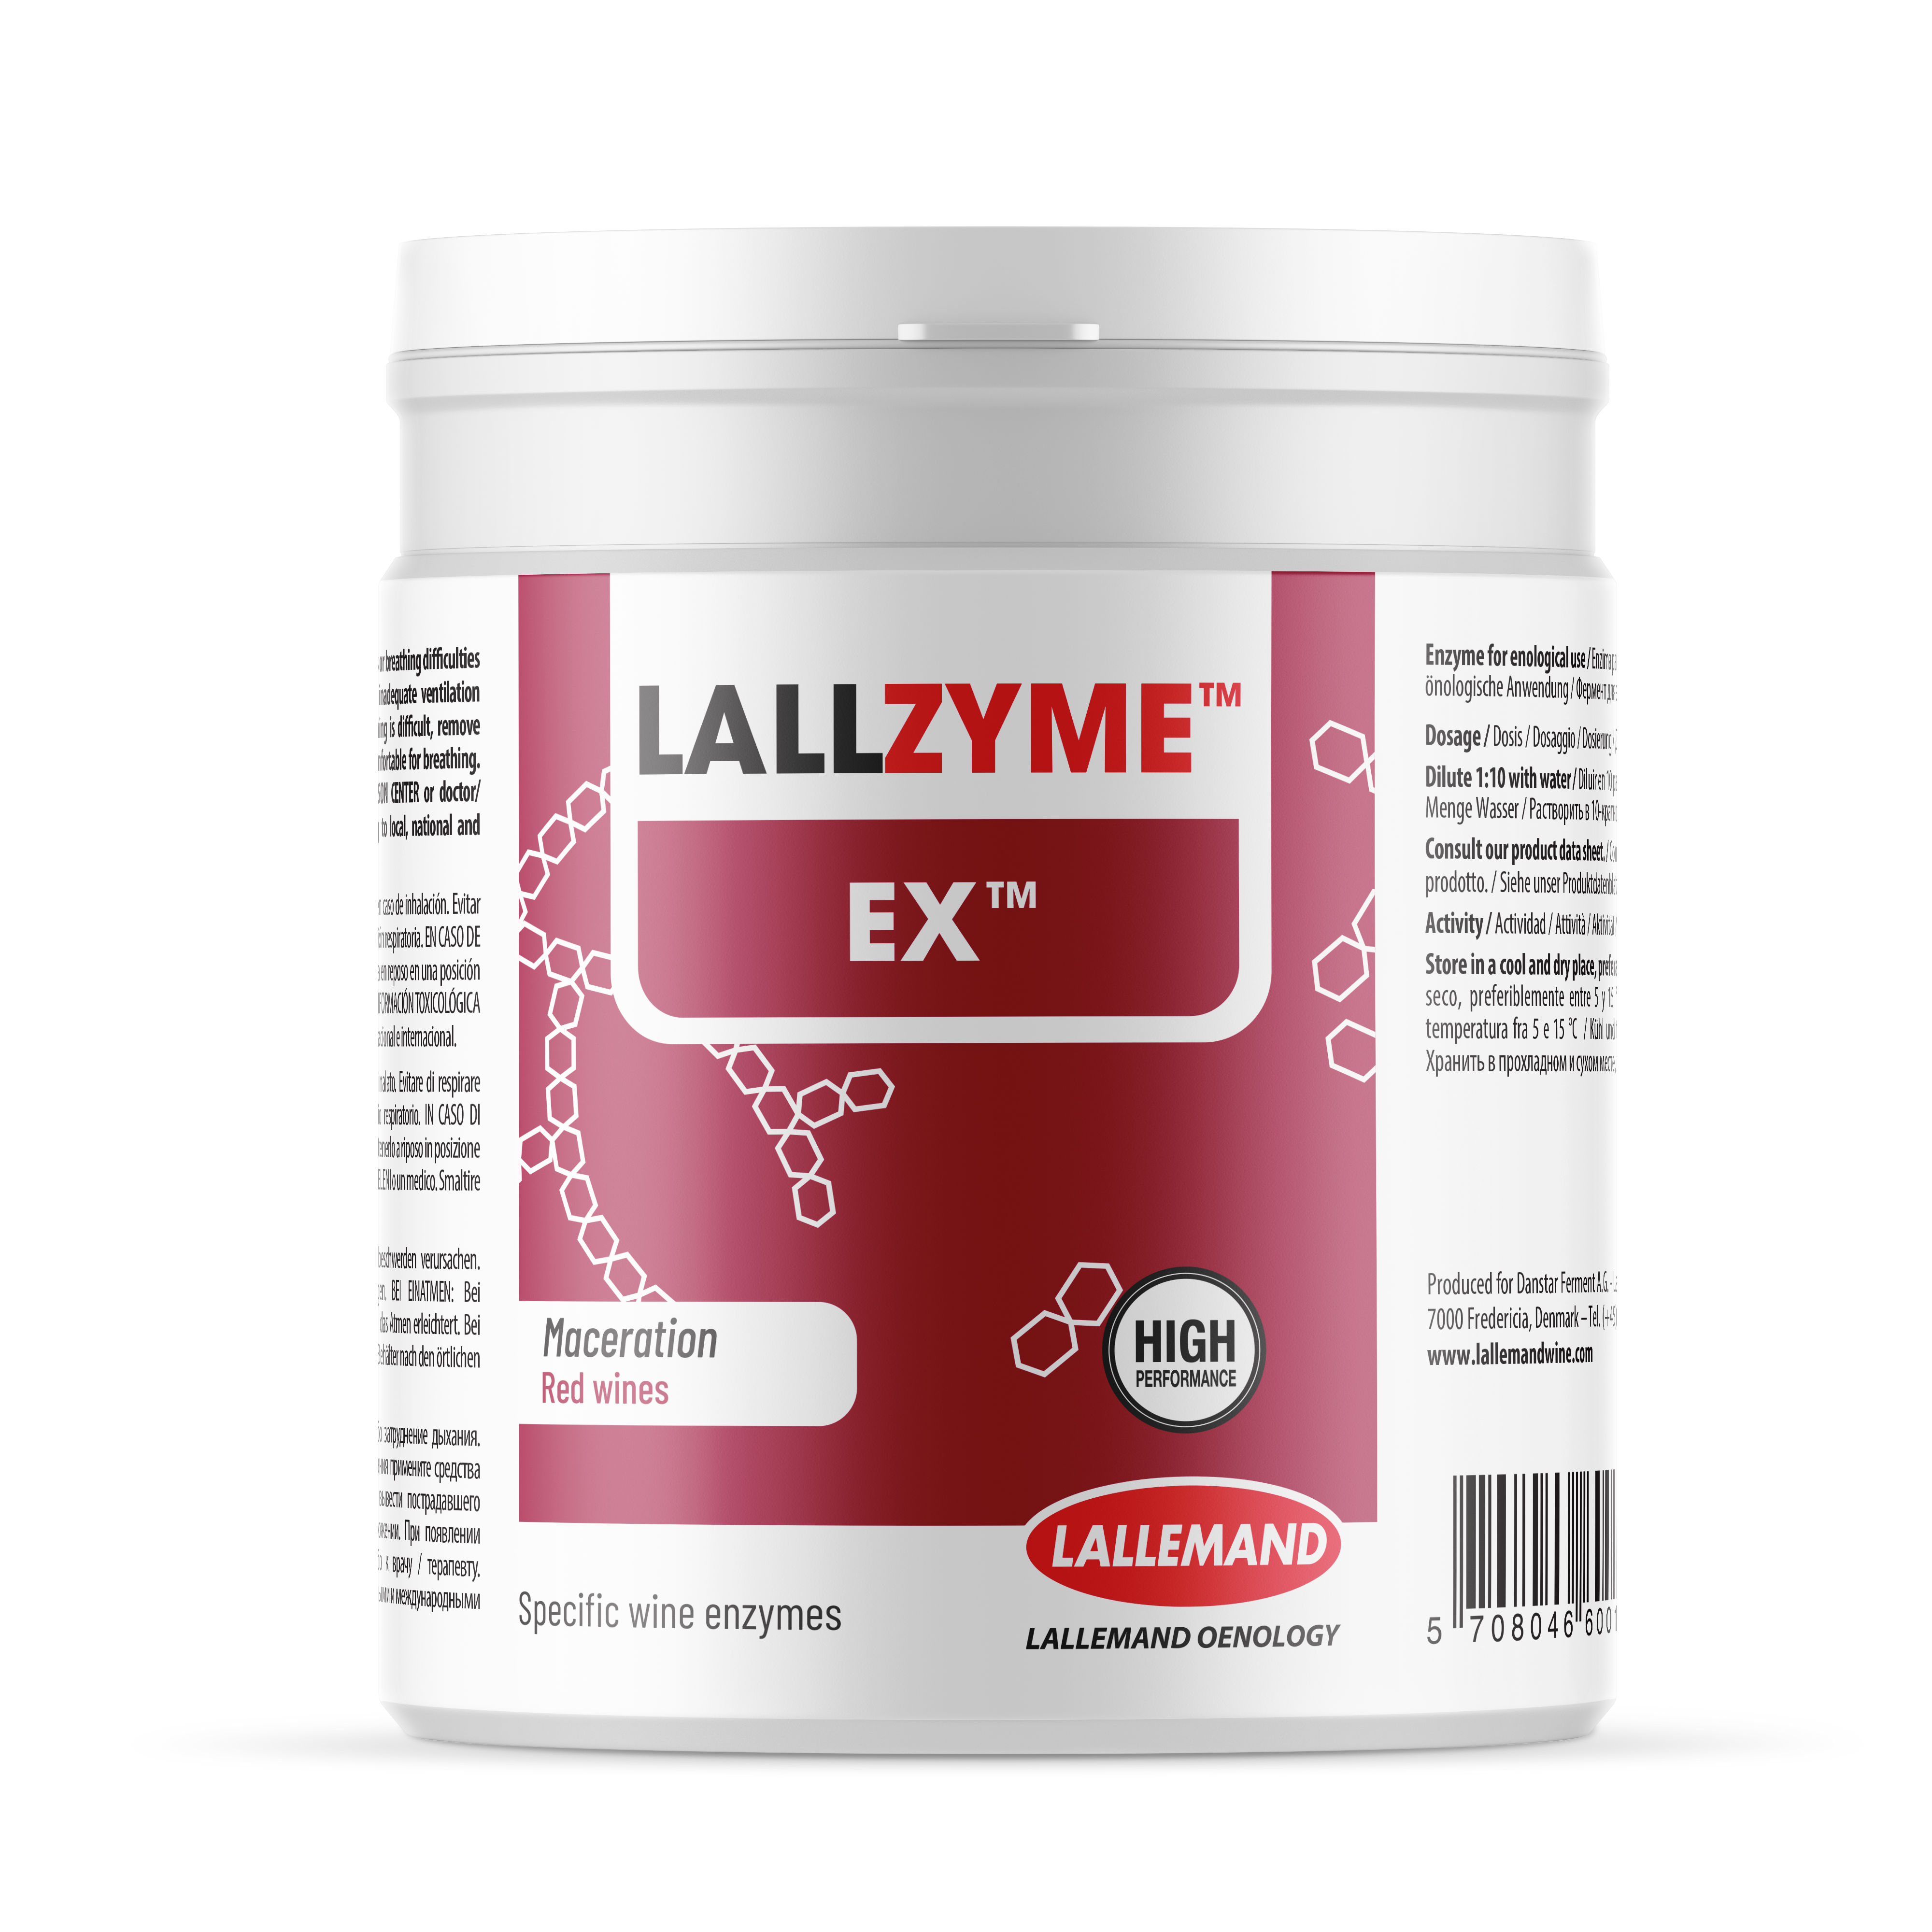 LALLZYME EX